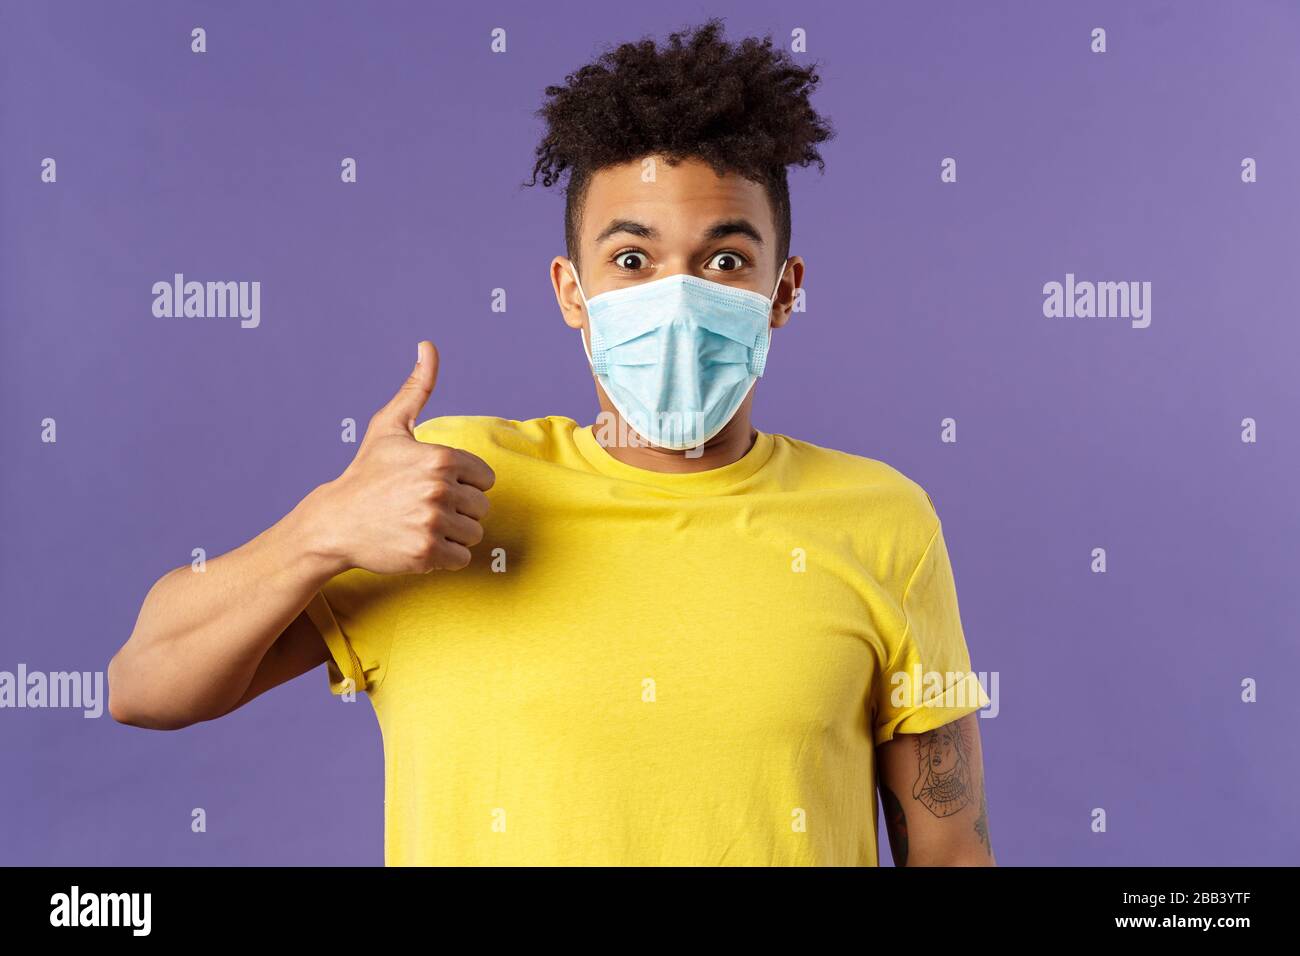 Covid19, healtcare and medicine concept. Excited young hispanic man in facial mask taking care of health, avoid public places, stay home and encourage Stock Photo